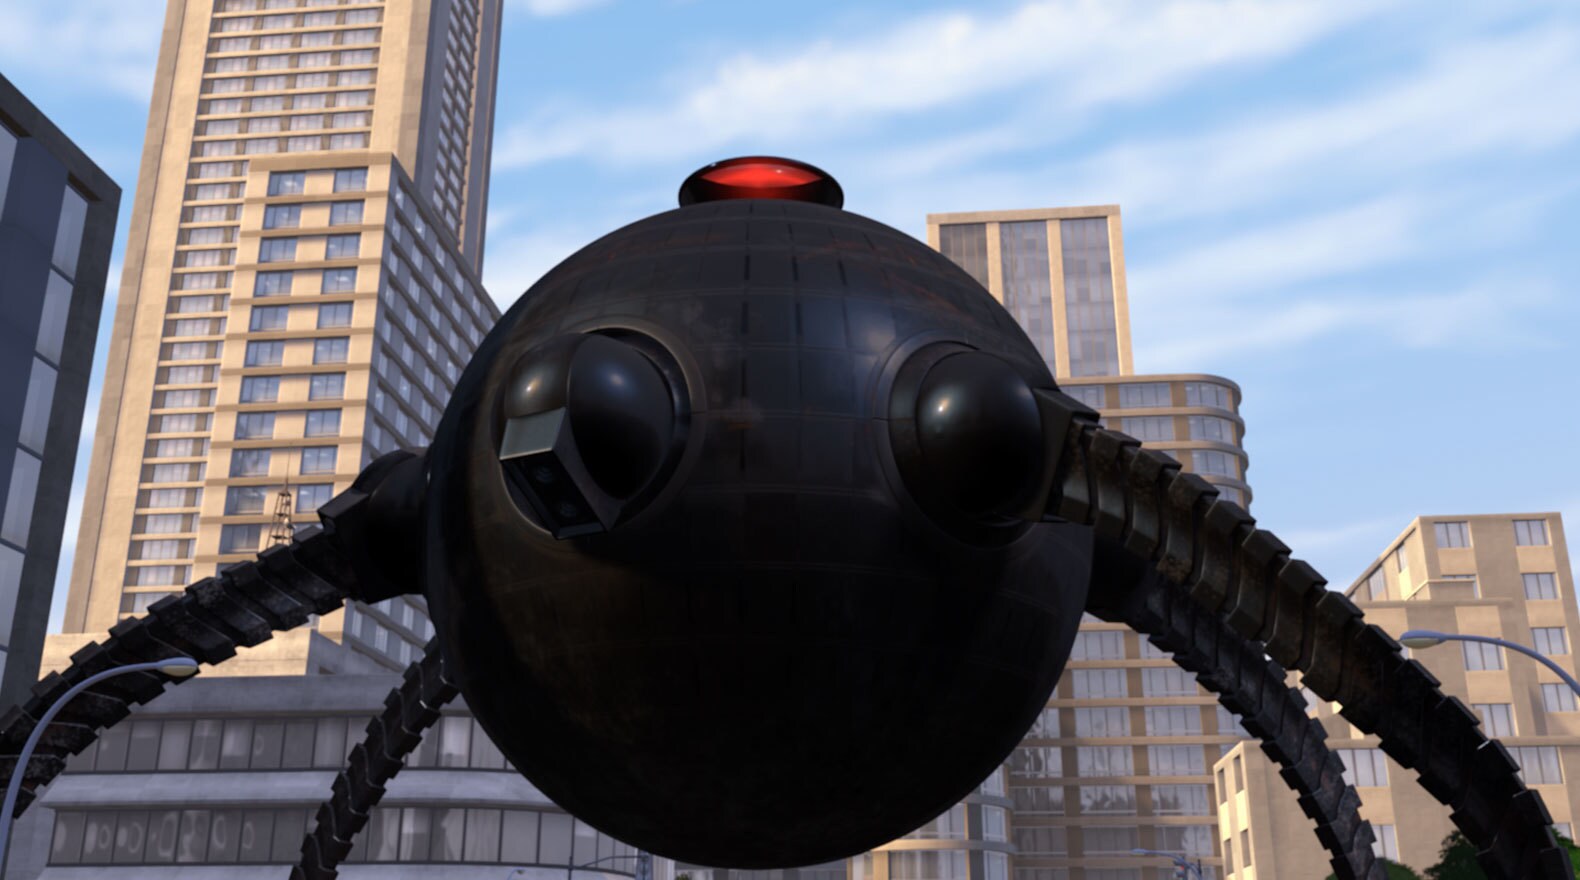 Syndrome’s invention and Omnidroid, is let loose on the city from the movie "The Incredibles"